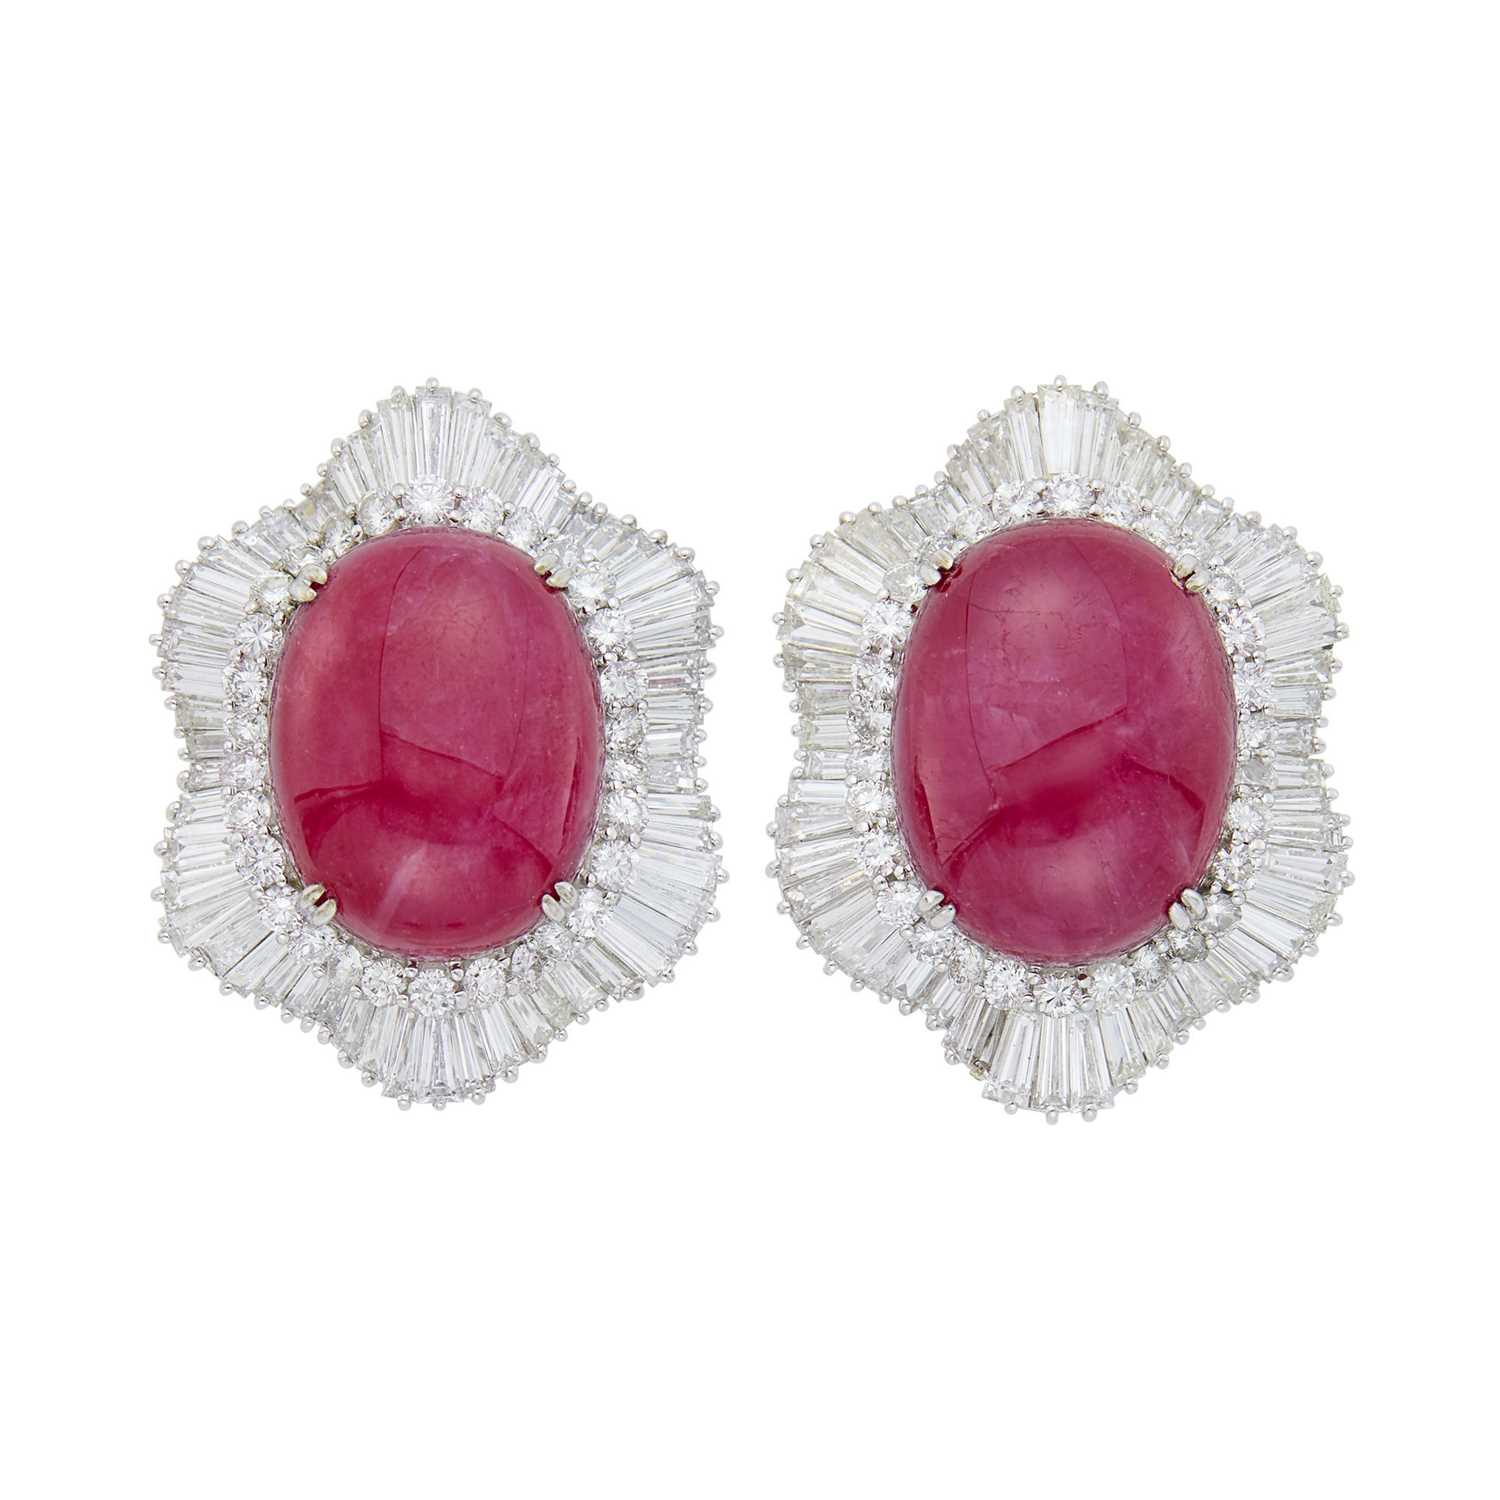 Lot 68 - Pair of White Gold, Cabochon Ruby and Diamond Earclips